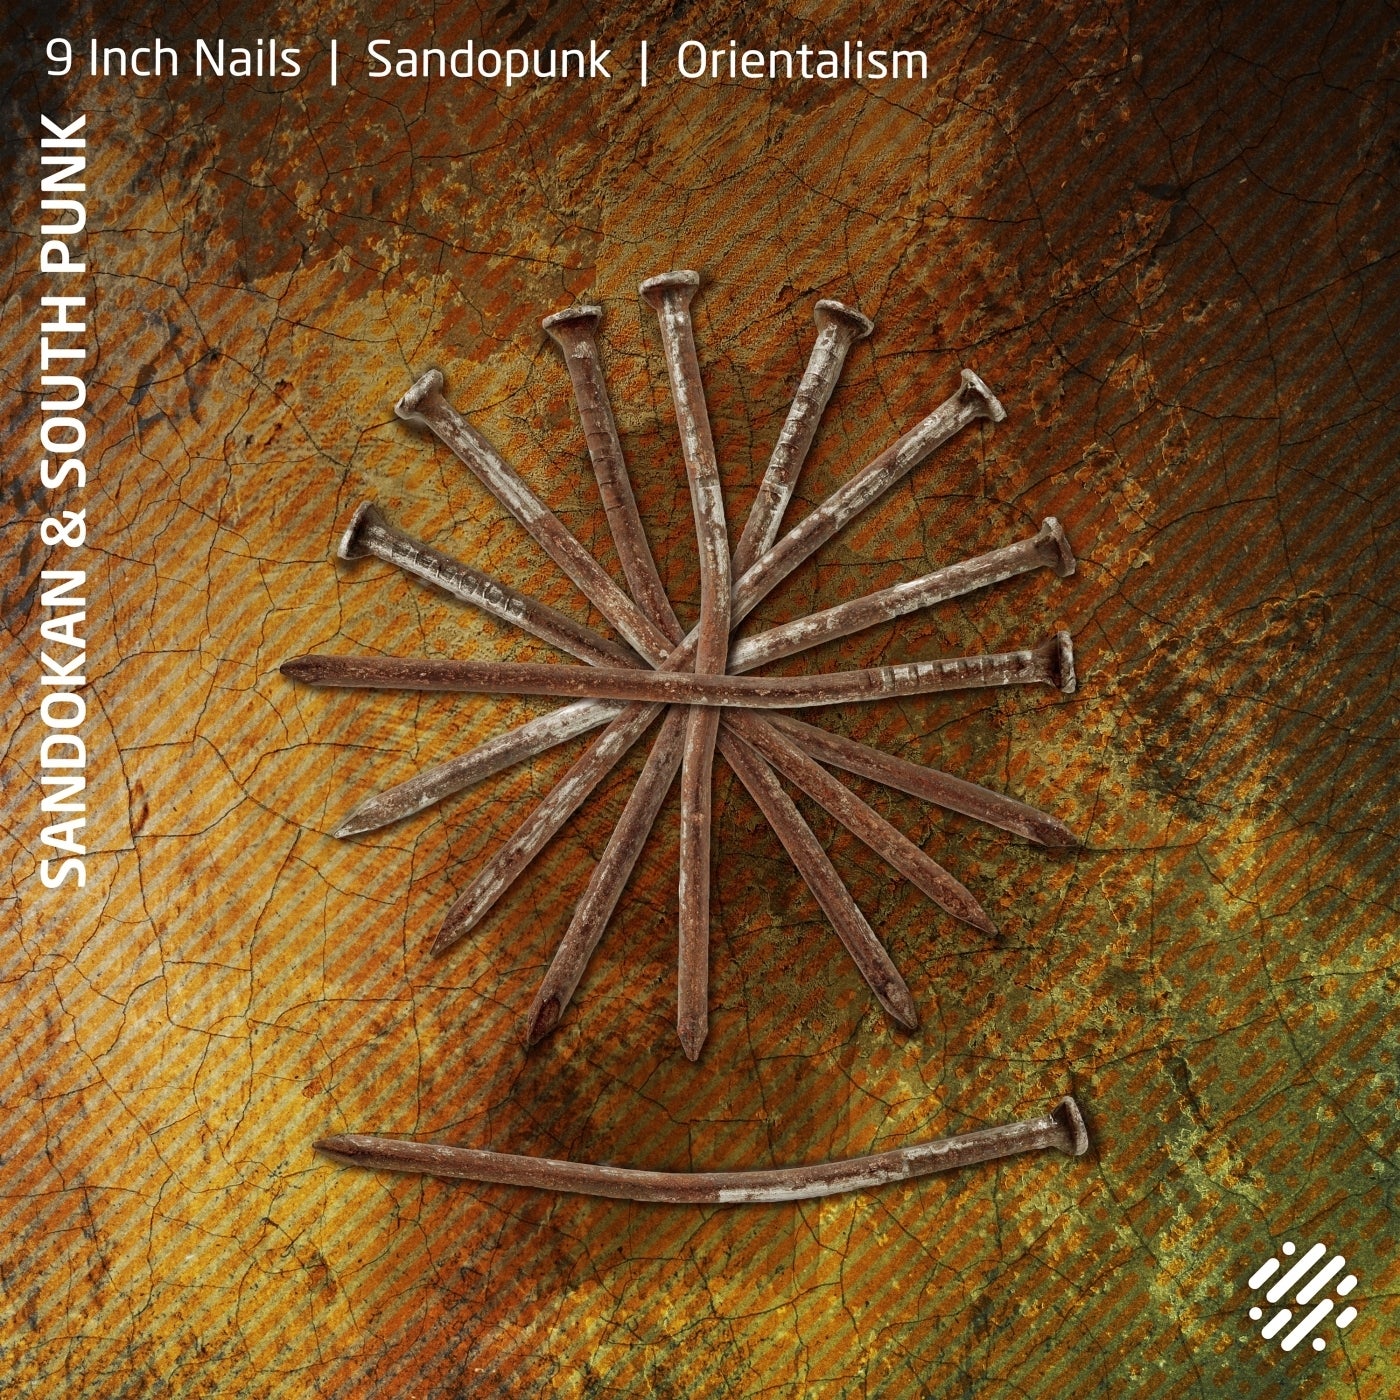 9 Inch Nails